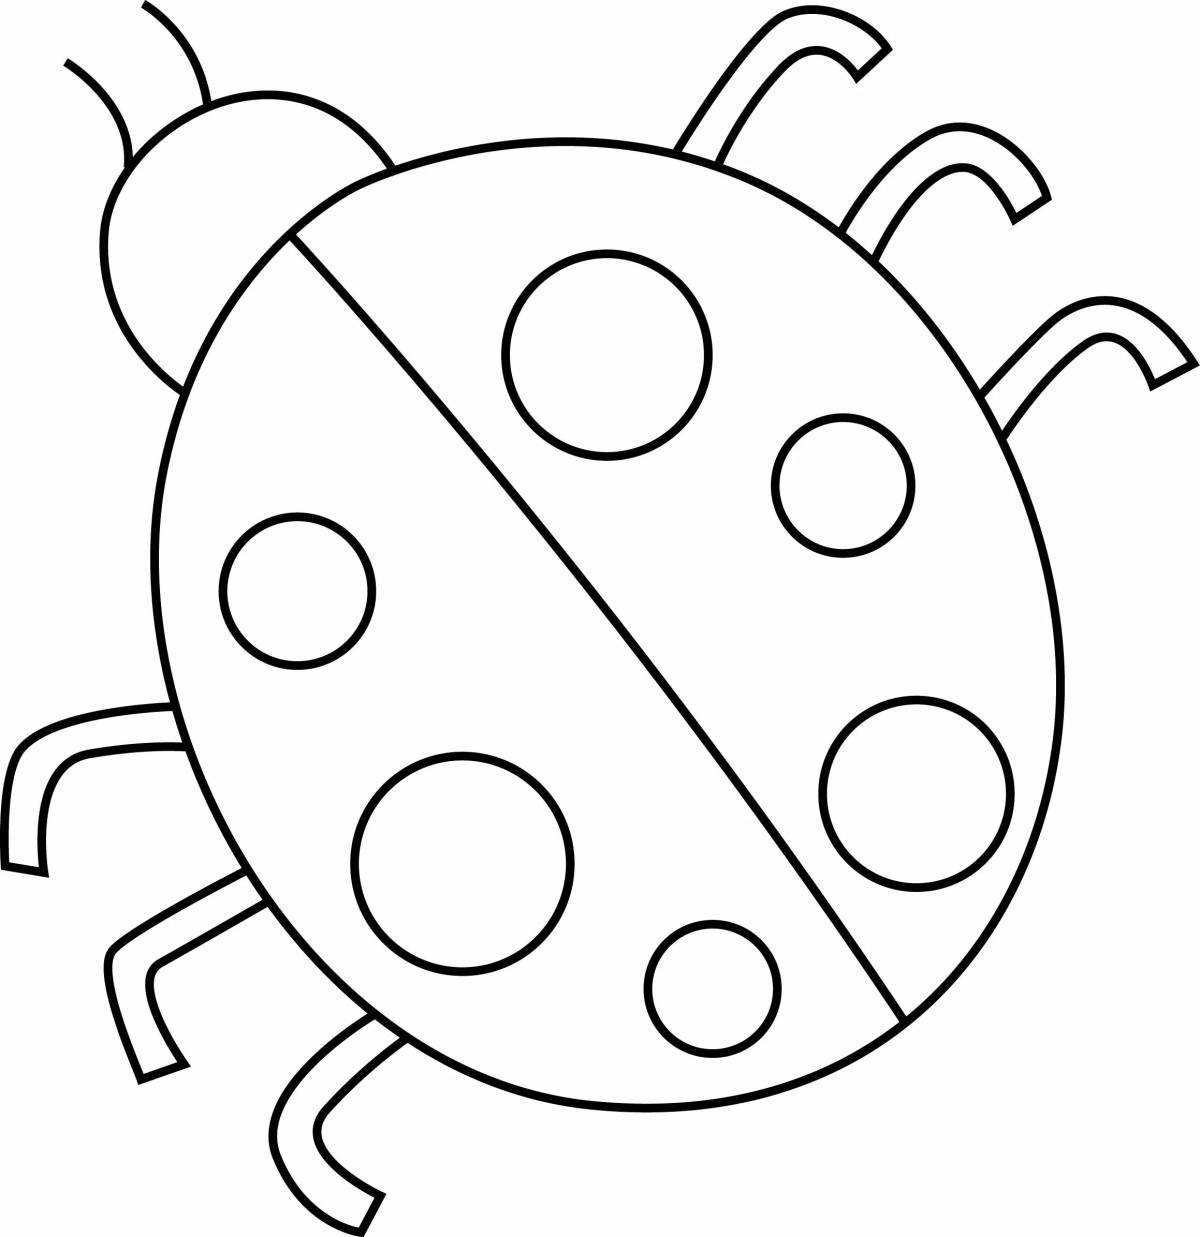 Colorful ladybug coloring page for 6-7 year olds